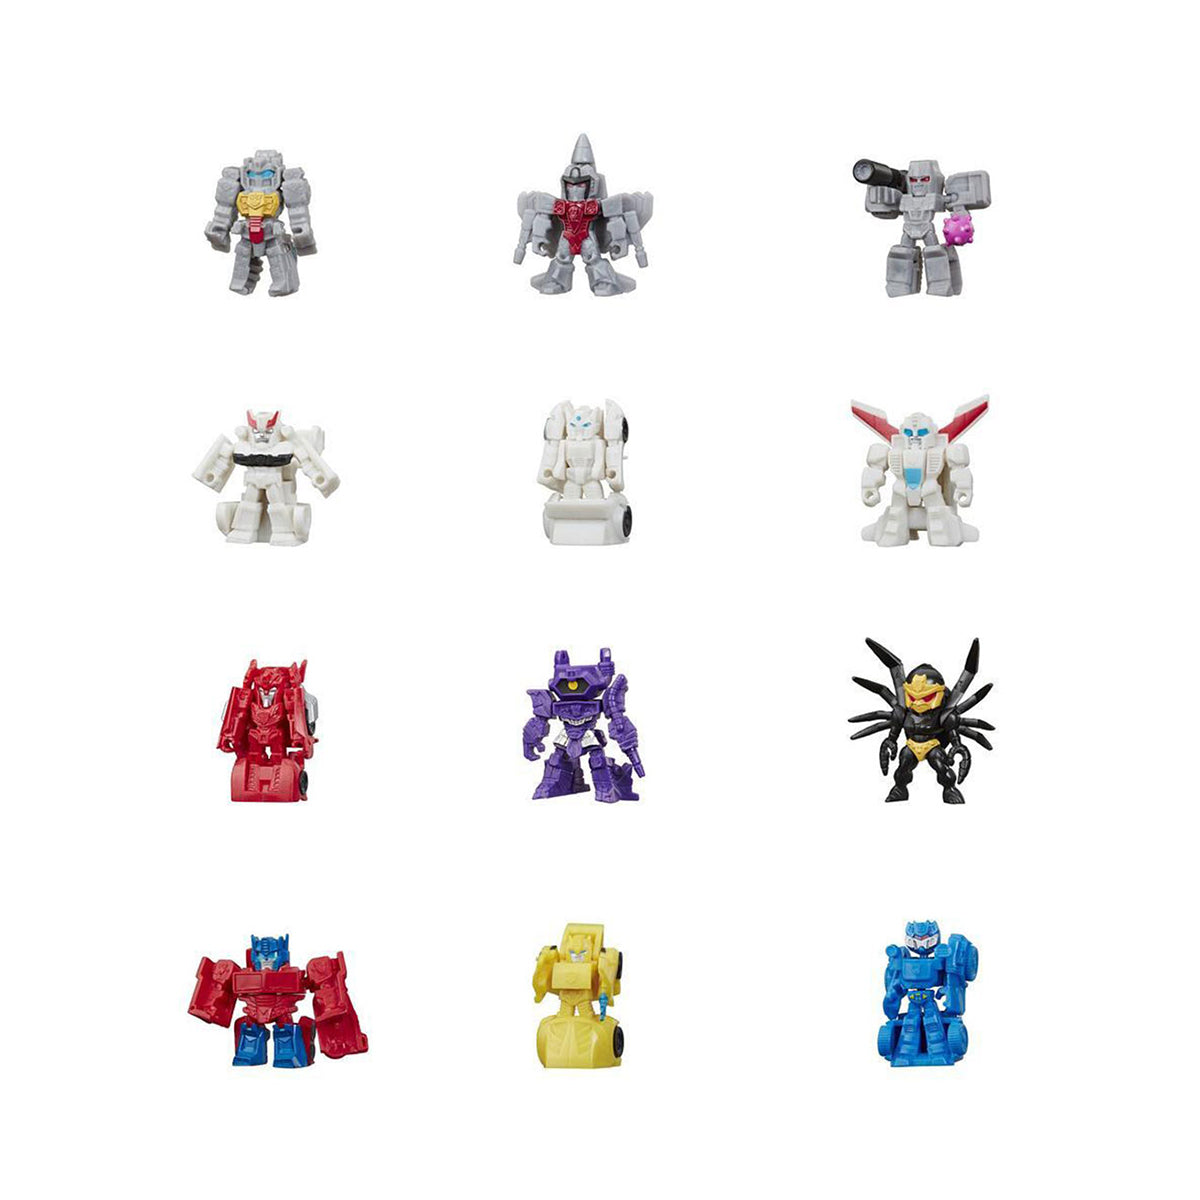 Transformers - Tiny Turbo Changers Series 2 Blind Bag (Styles Vary - One Supplied)